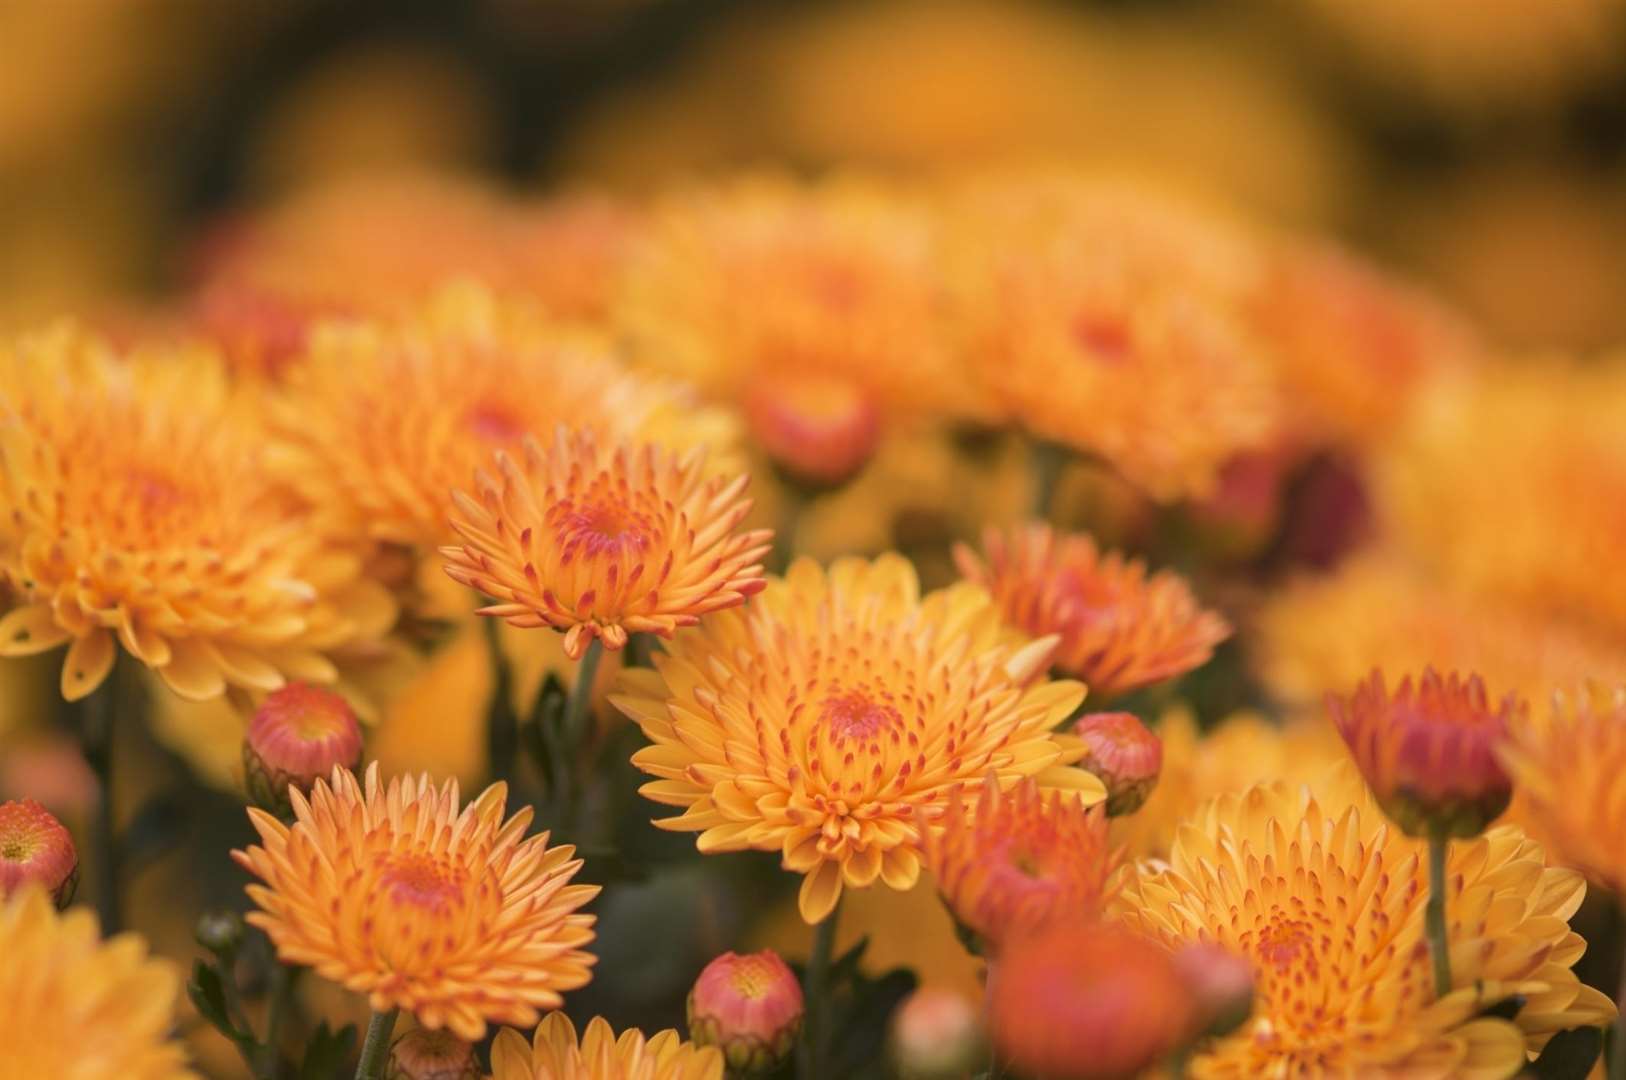 Treating yourself to a bunch of Chrysanthemums will brighten your home and remove spiders at the same time!